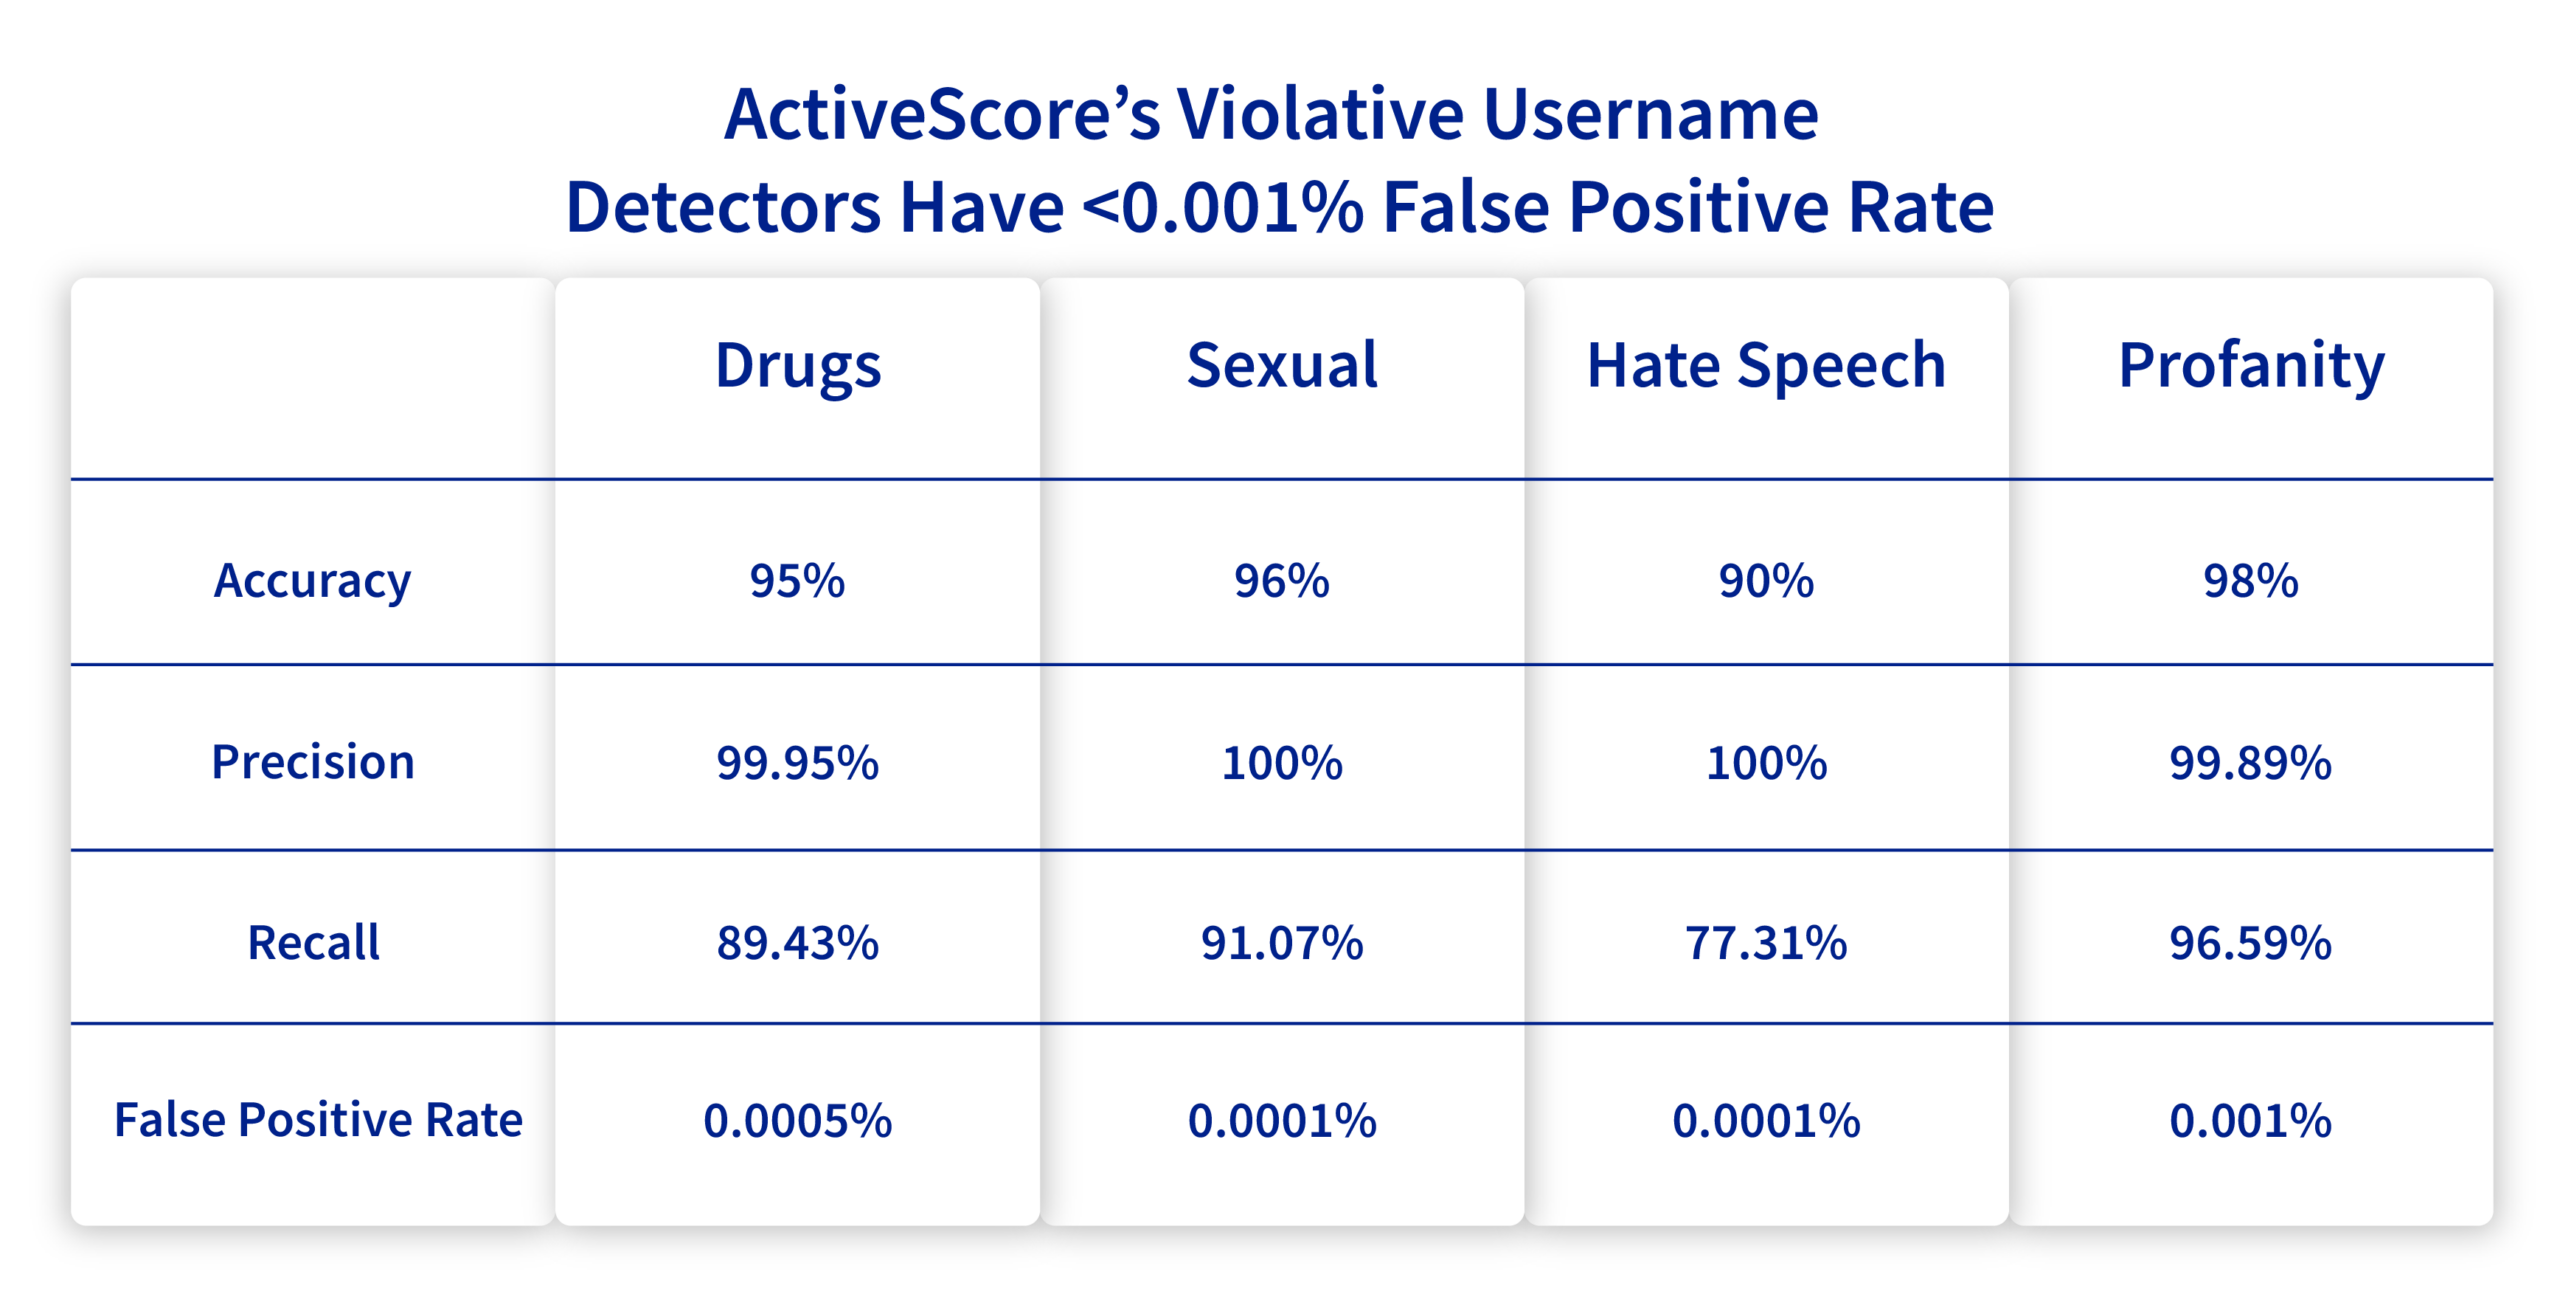 Table showing ActiveScore’s violative username detectors with accuracy, precision, recall, and false positive rates for drugs, sexual, hate speech, and profanity categories.